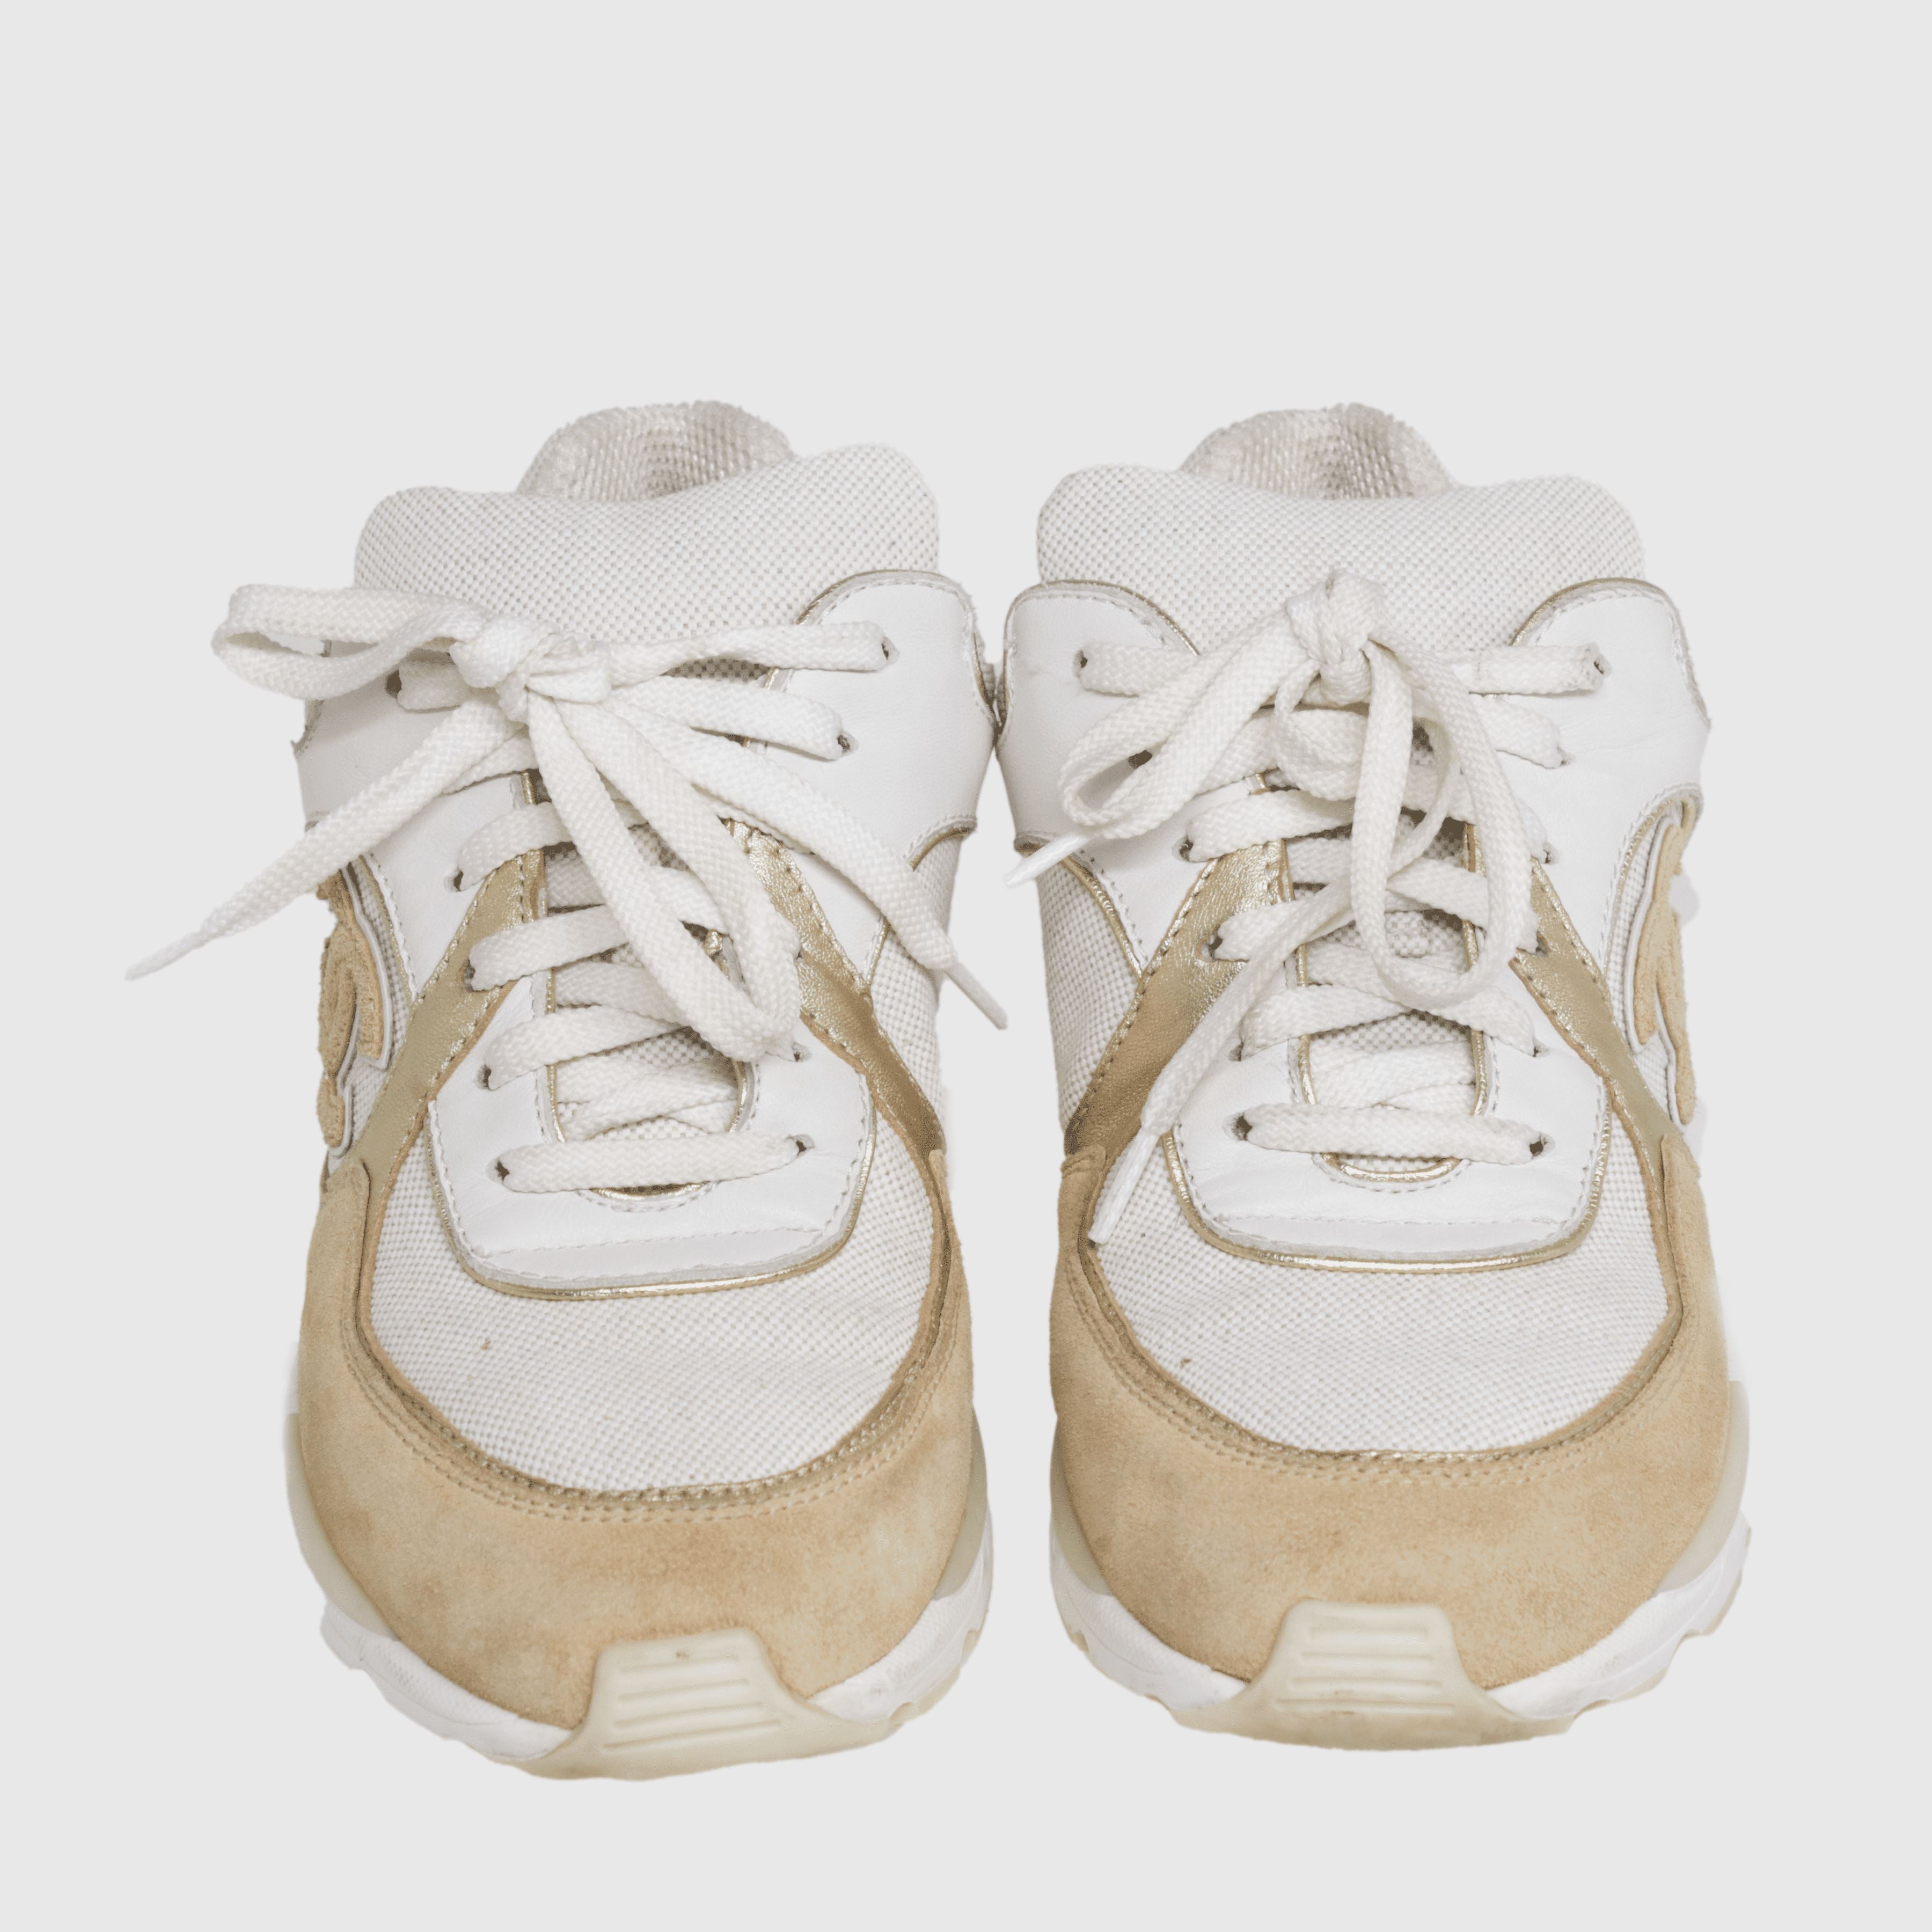 White/Beige Canvas CC Logo Lace Up Sneakers Shoes Chanel 